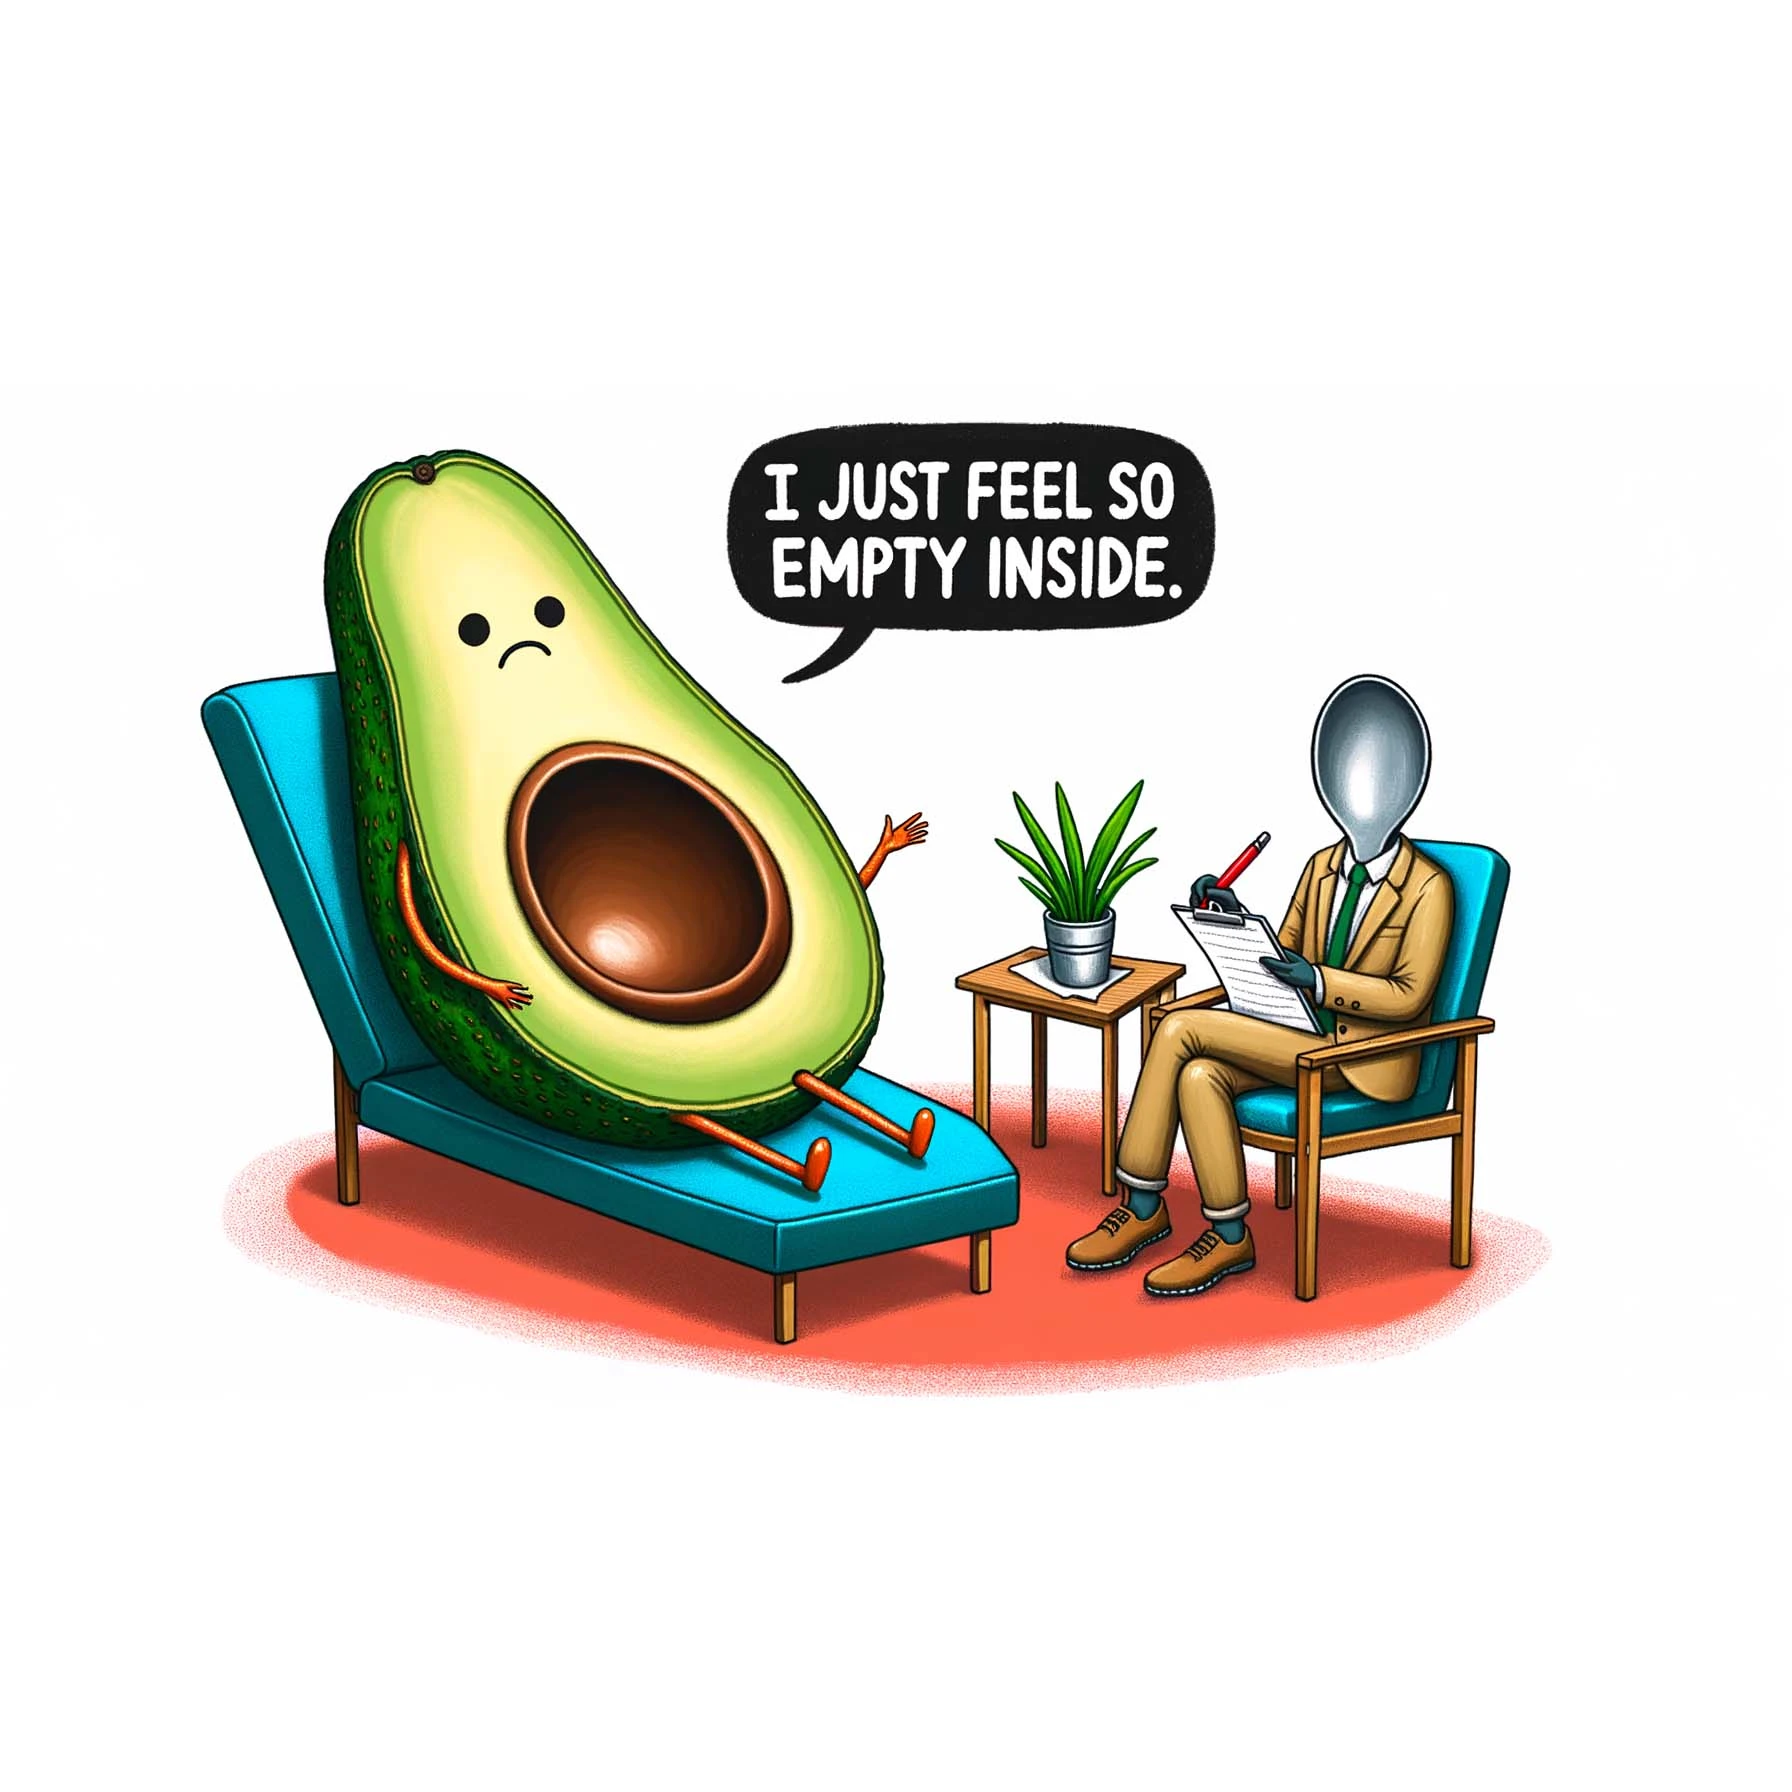 An illustration of an avocado sitting in a therapist's chair, saying 'I just feel so empty inside' with a pit-sized hole in its center. The therapist, a spoon, scribbles notes.